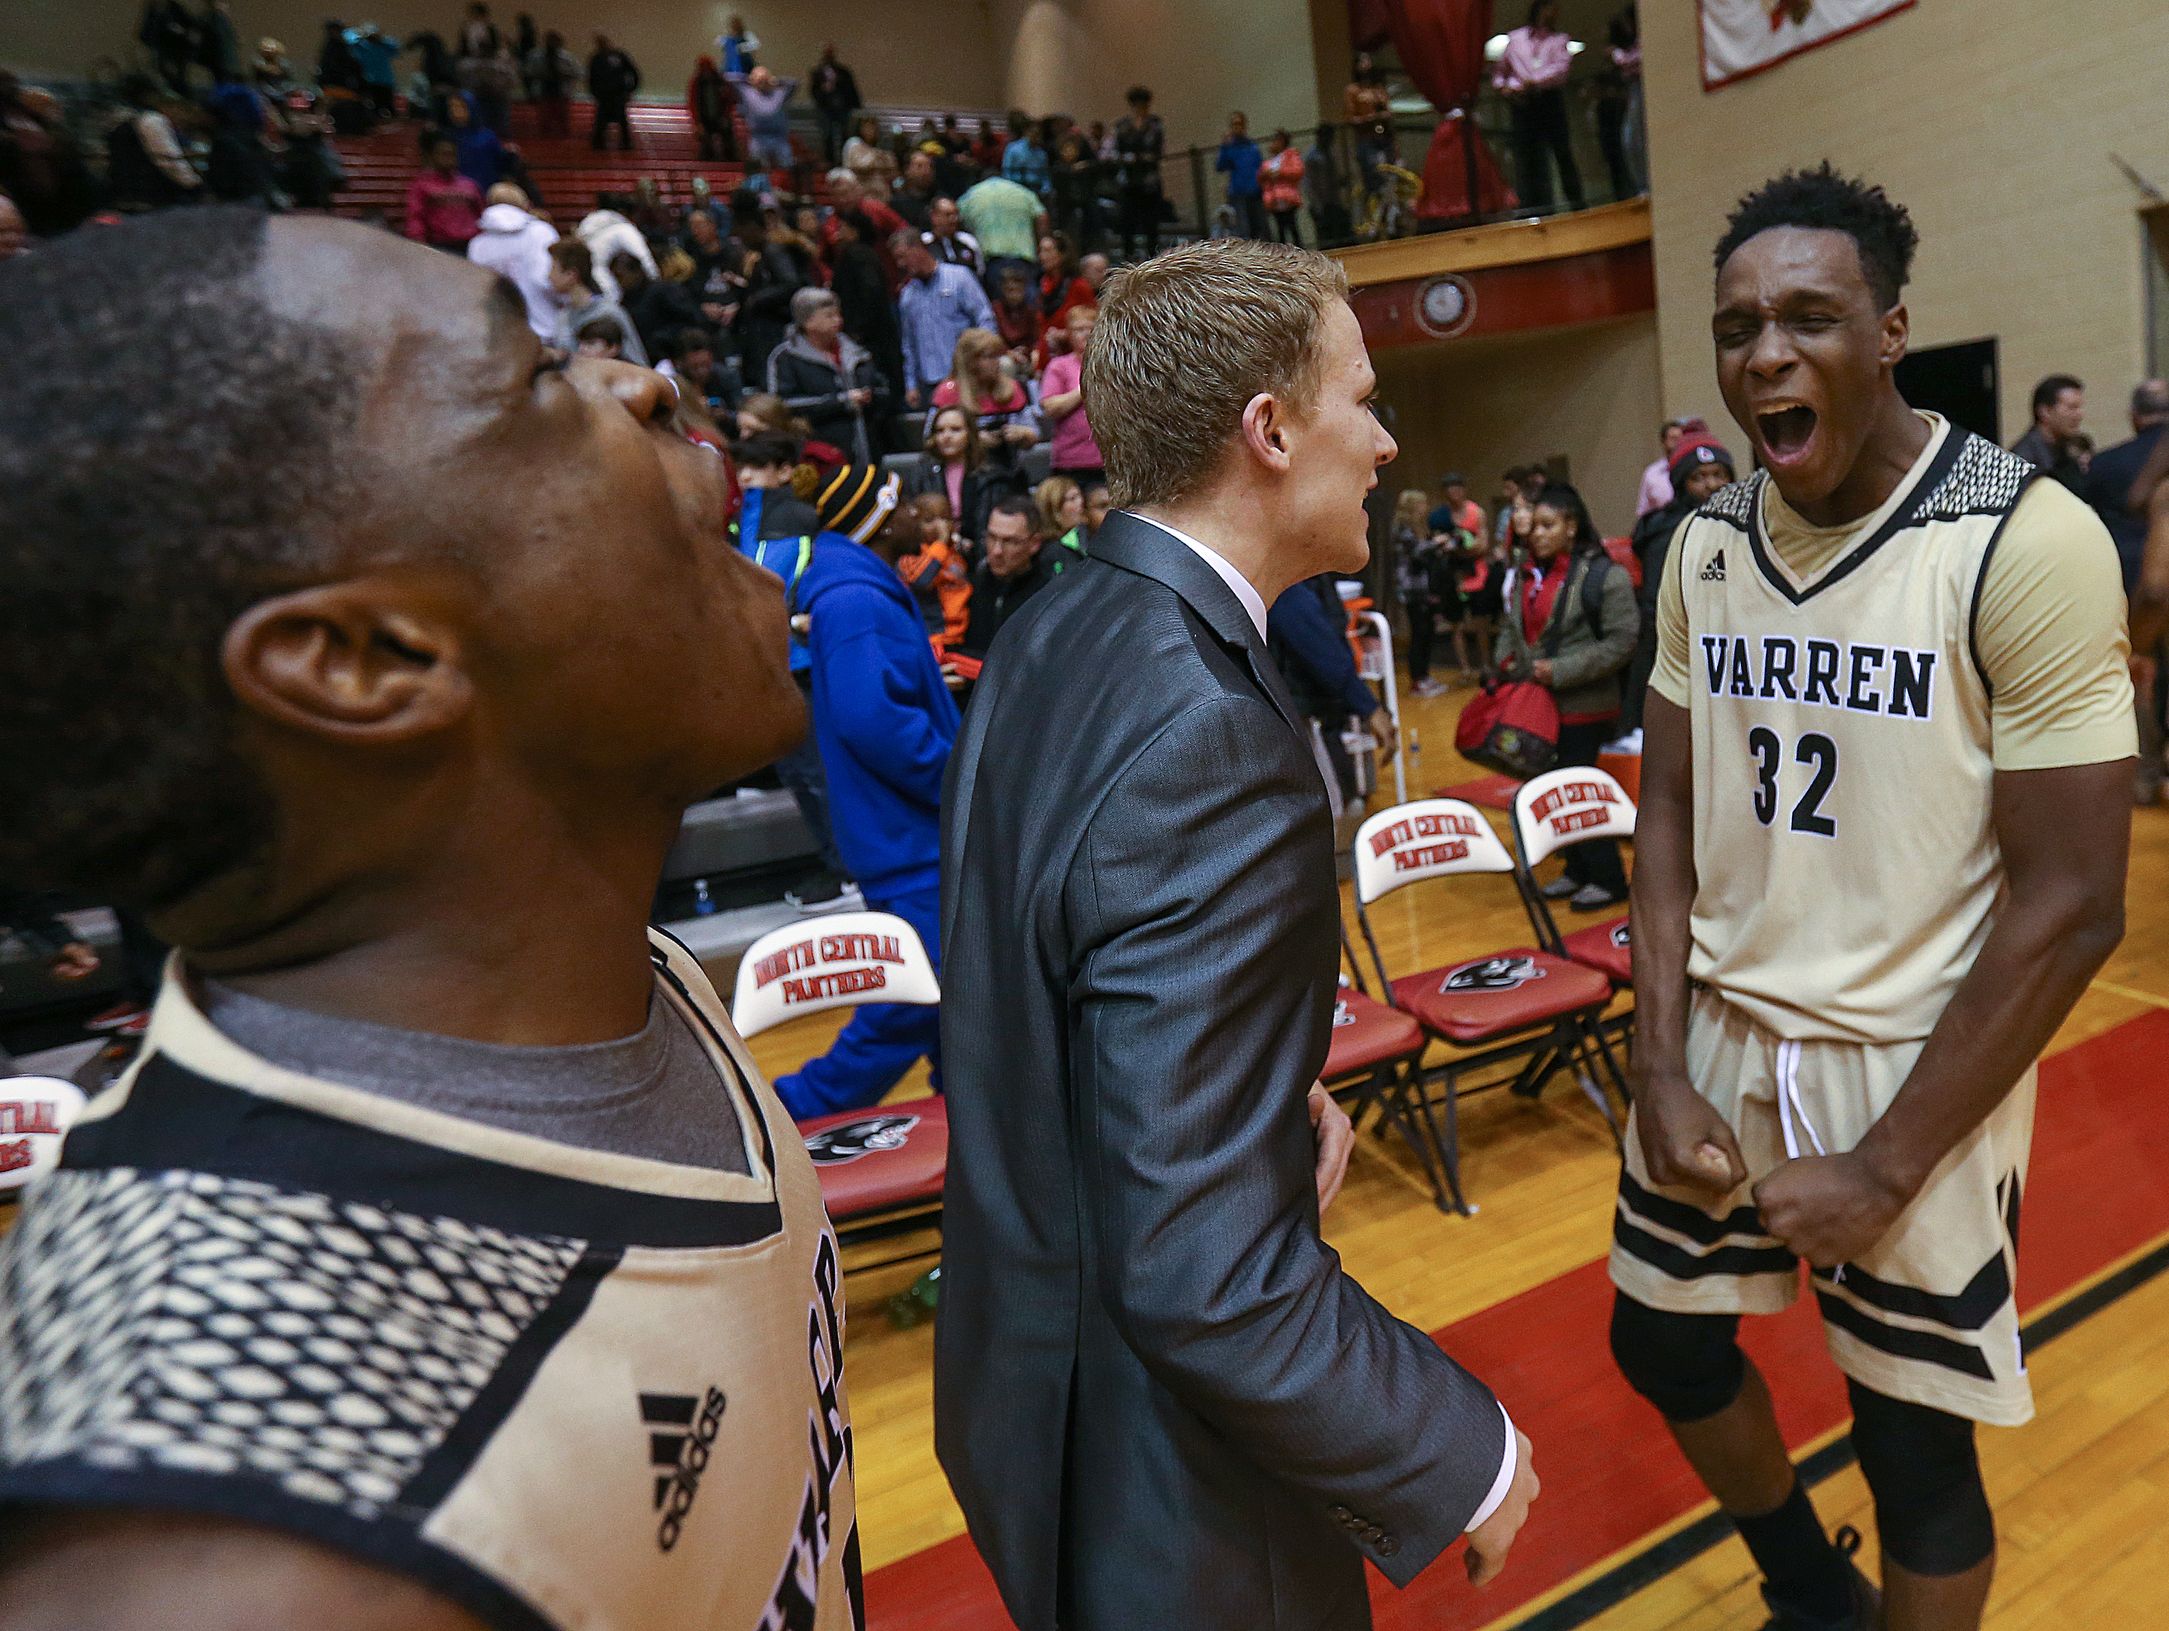 From left, Warren Central Warriors Dean Tate (10) and Warren Central Warriors Mack Smith (32) celebrate after defeating the North Central Panthers, 63-51, Friday. Warren Central broke a 14-game losing streak to North Central.